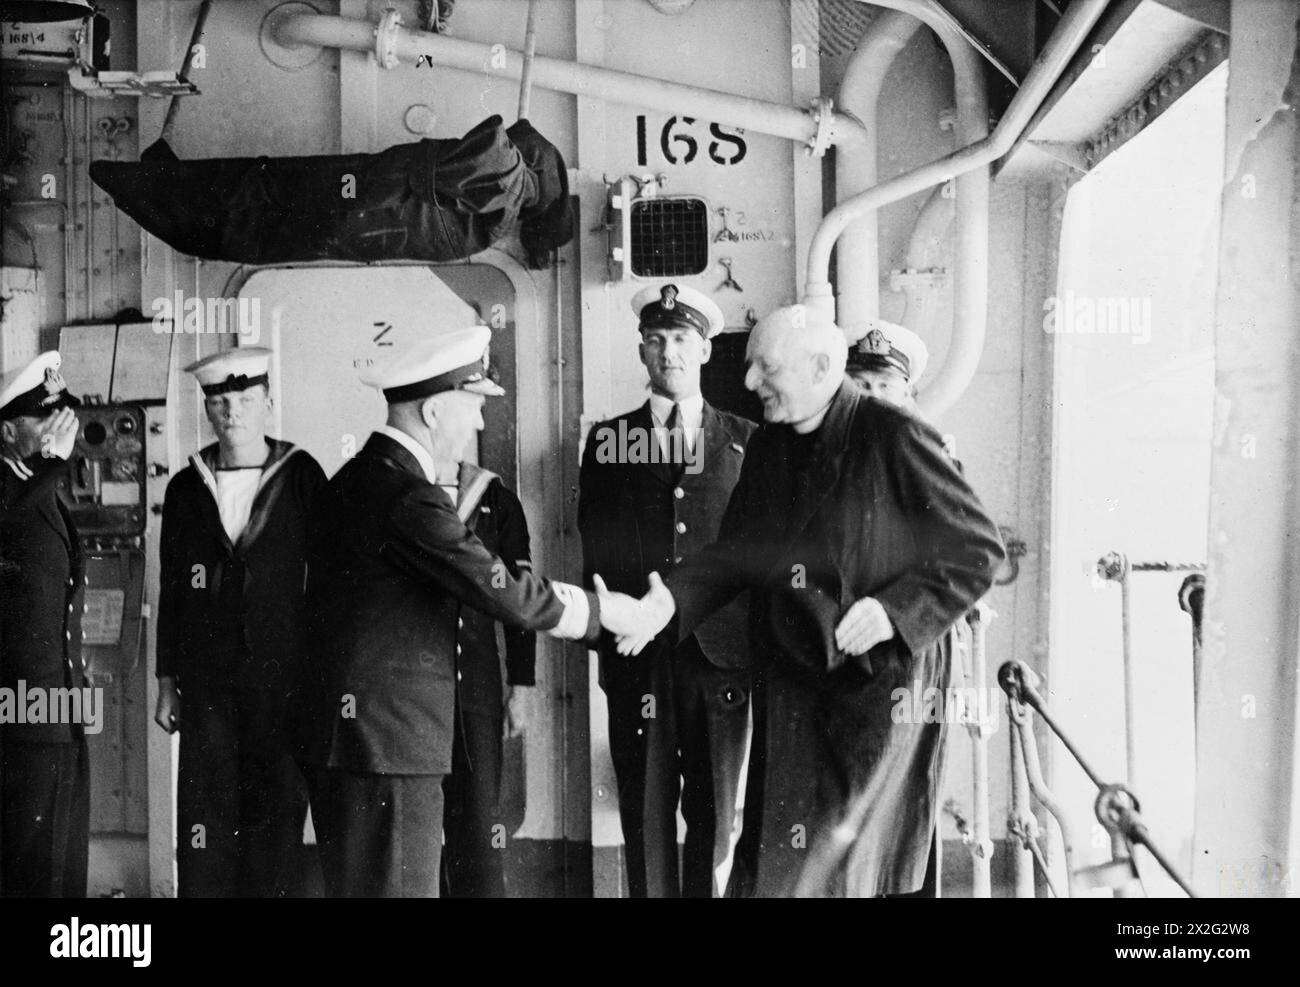 THE ARCHBISHOP OF YORK VISITS A CARRIER. 22 APRIL 1945, ON BOARD HMS VENERABLE, FLAGSHIP OF THE 11TH AIRCRAFT CARRIER SQUADRON. - His Grace being welcomed on board HMS VENERABLE by Rear Admiral Cecil Harcourt, CB, CBE Stock Photo